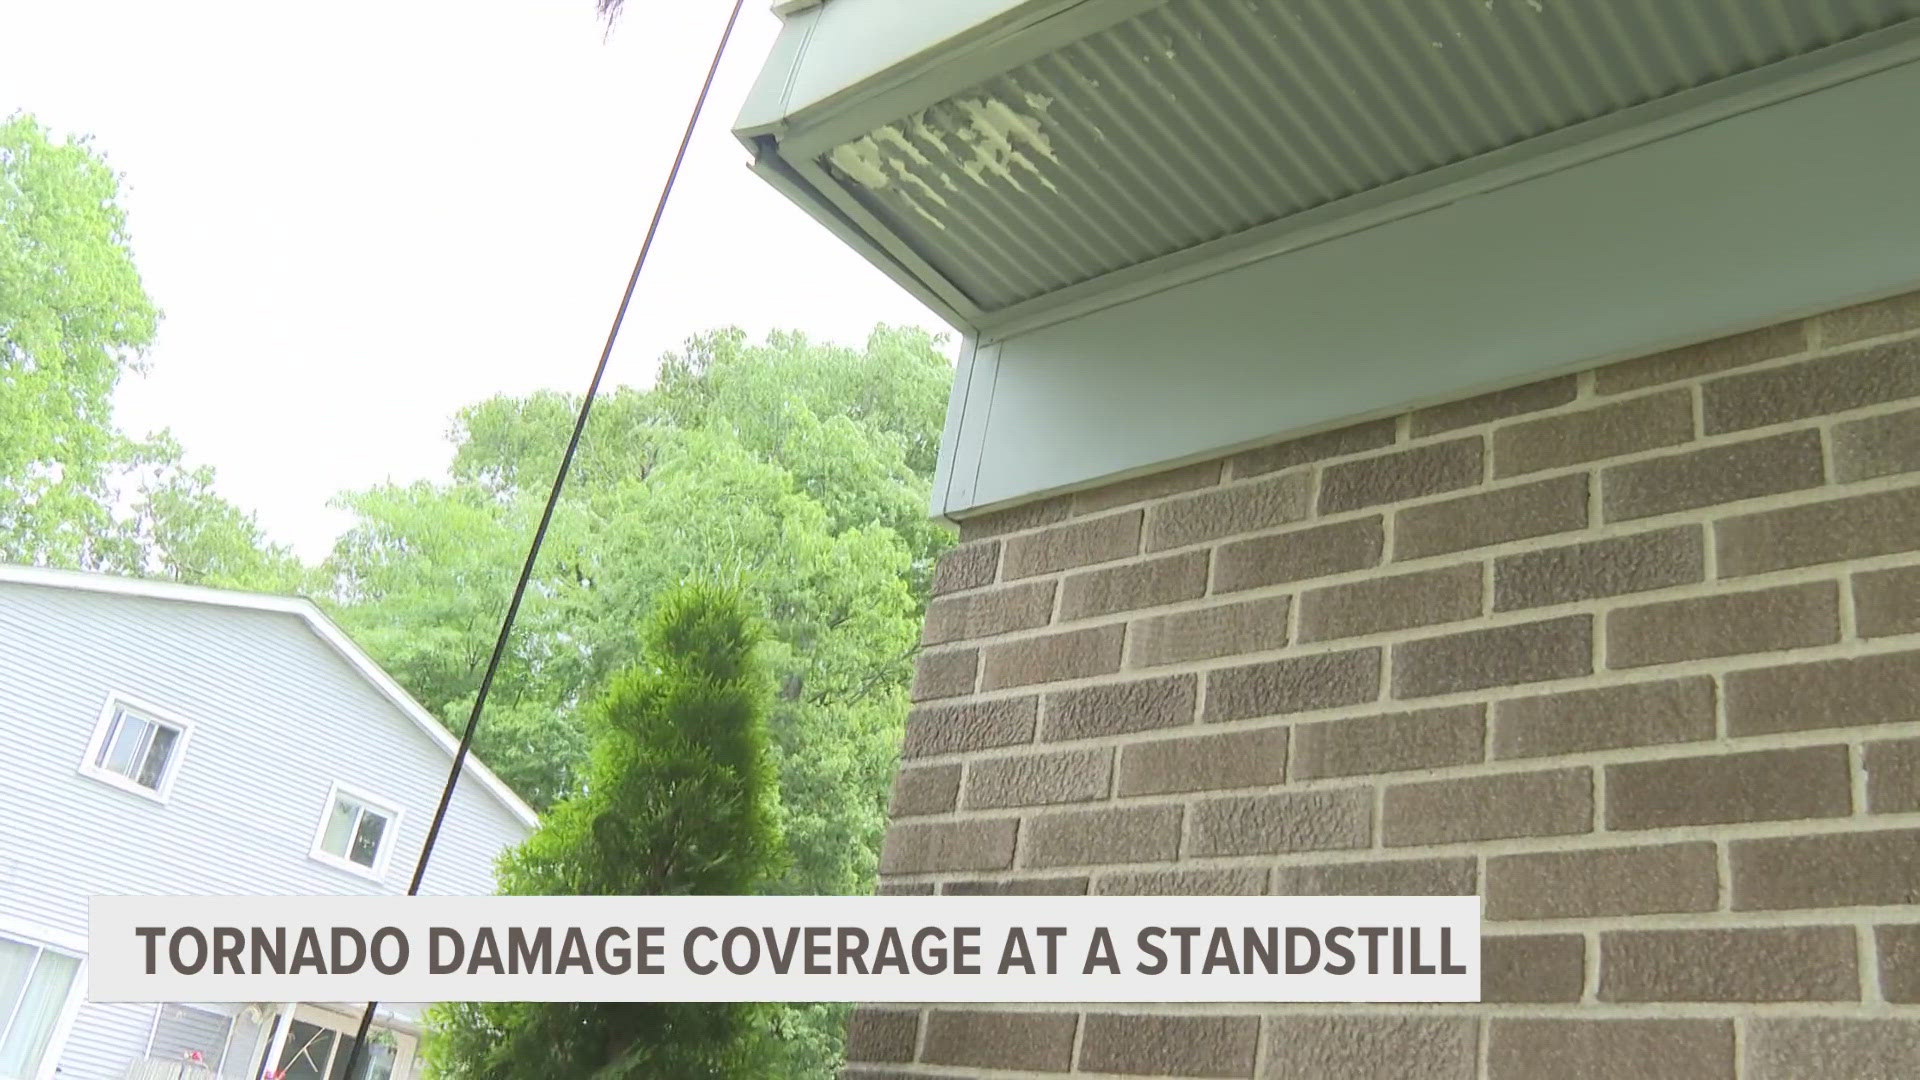 A West Michigan homeowner is at a standstill, trying to repair damage to his home after an EF-1 tornado hit the neighborhood.